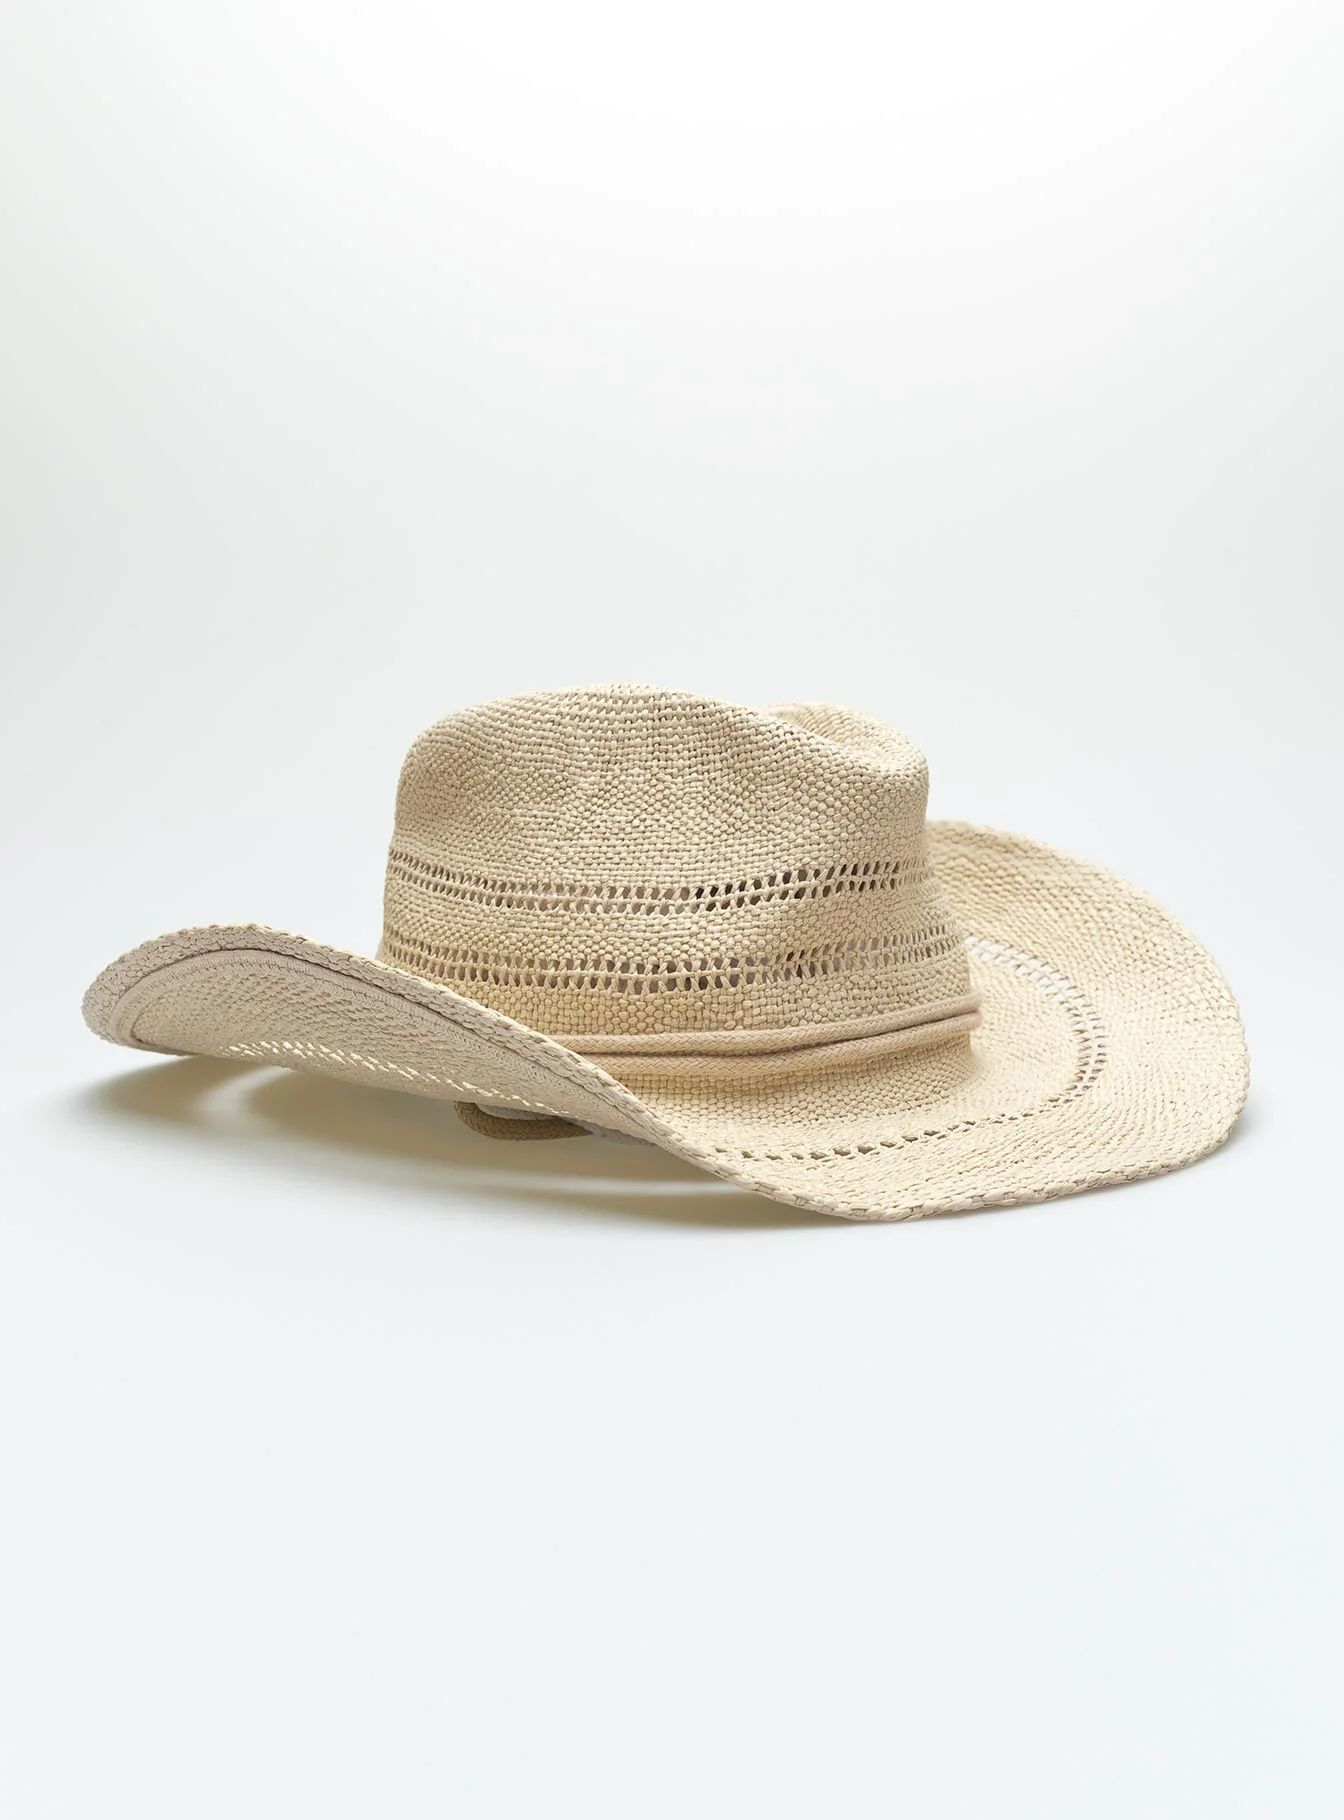 Mid Morning Cowboy Hat Beige | Princess Polly US